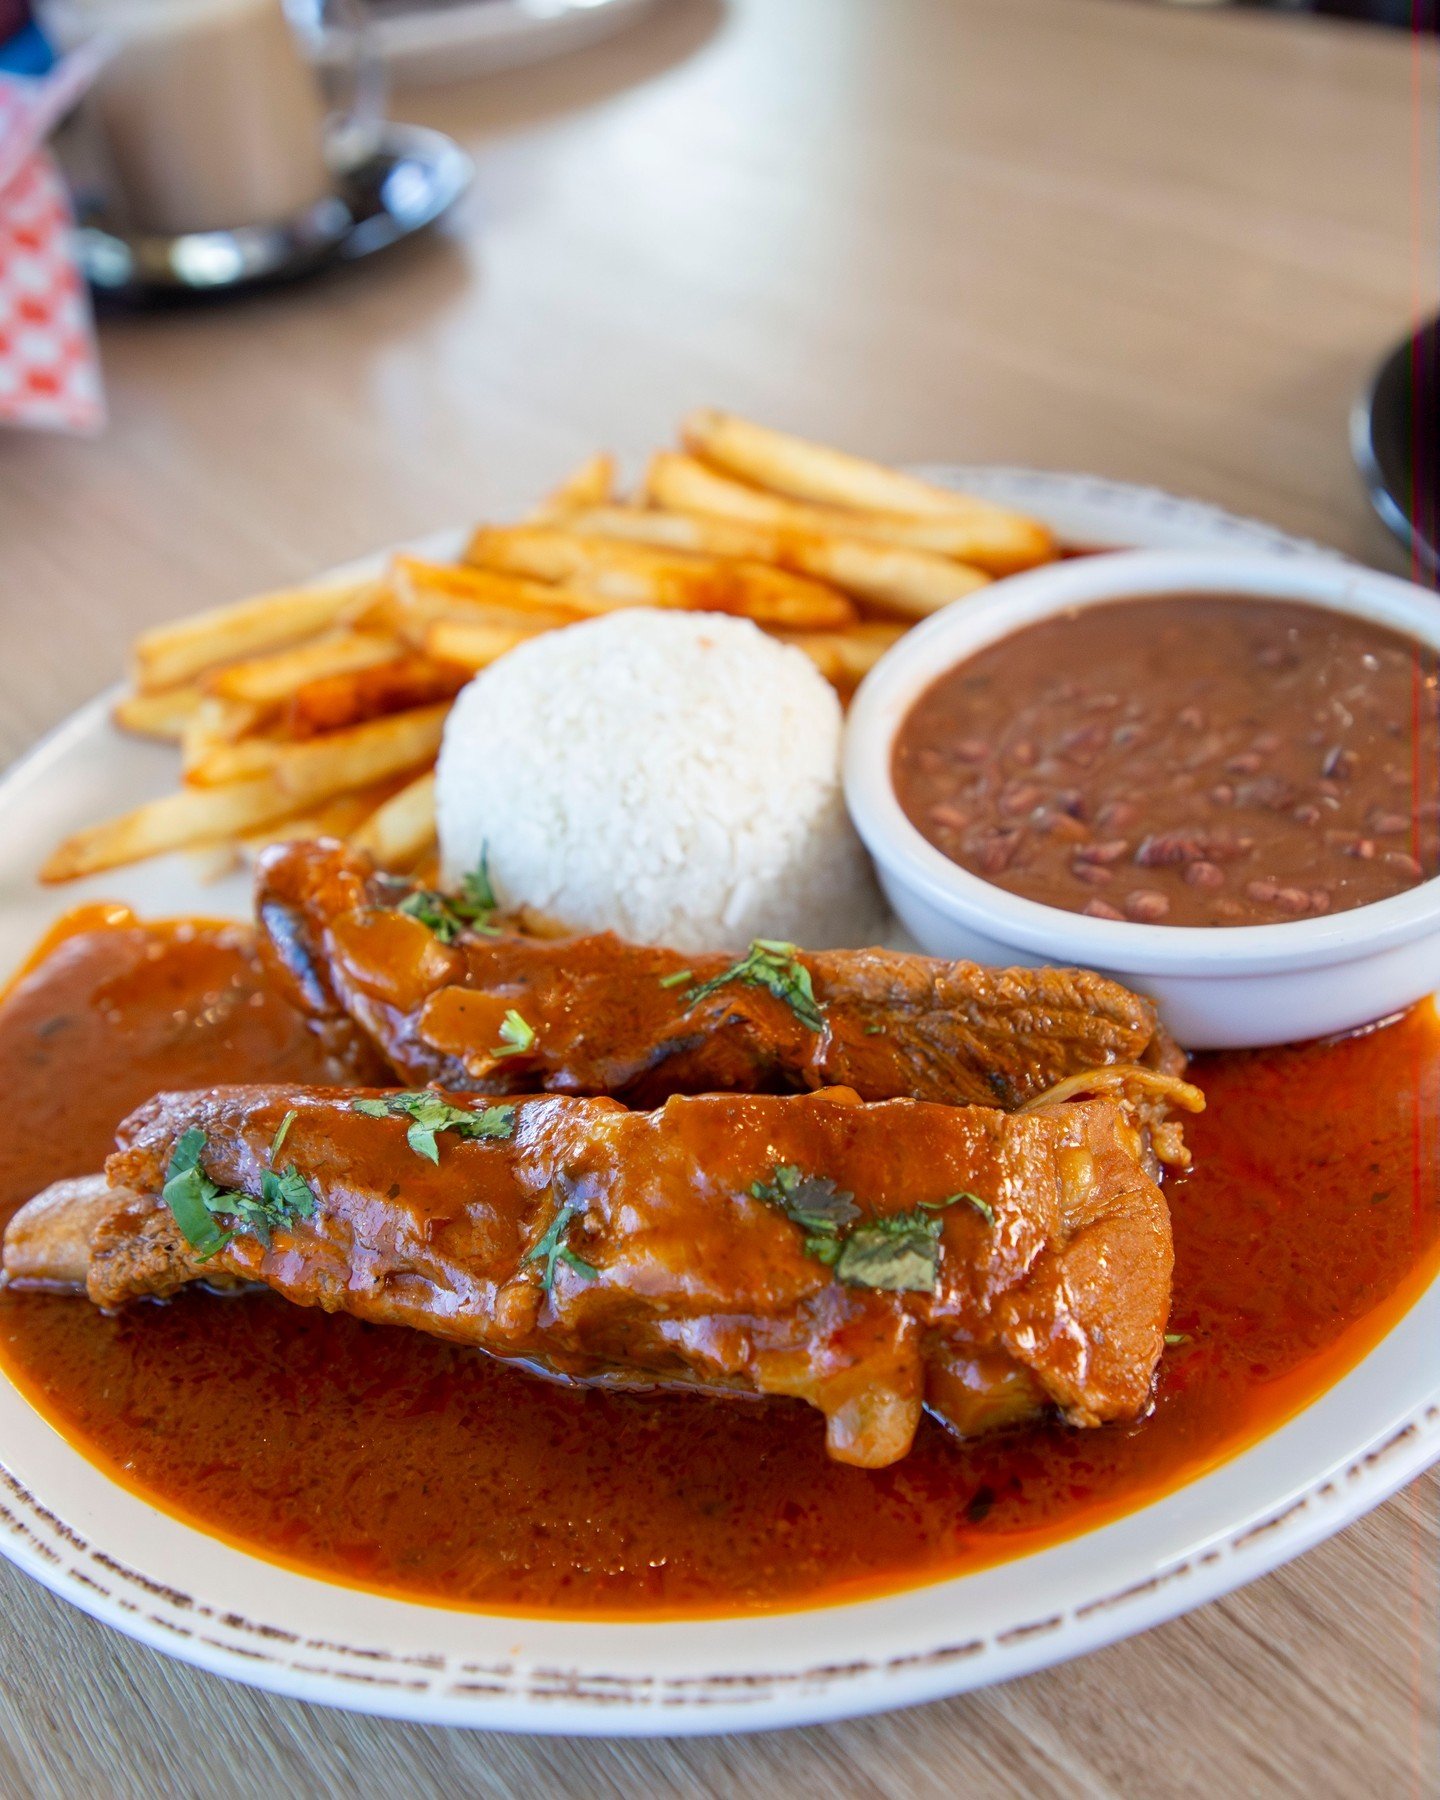 Let us make your dreams of not cooking come true today 🧑&zwj;🍳

#caliclt #cltfood #cltrestaurants #colombianfood #comidacolombiana #colombianrestaurant #cltfoodie #calicolombian